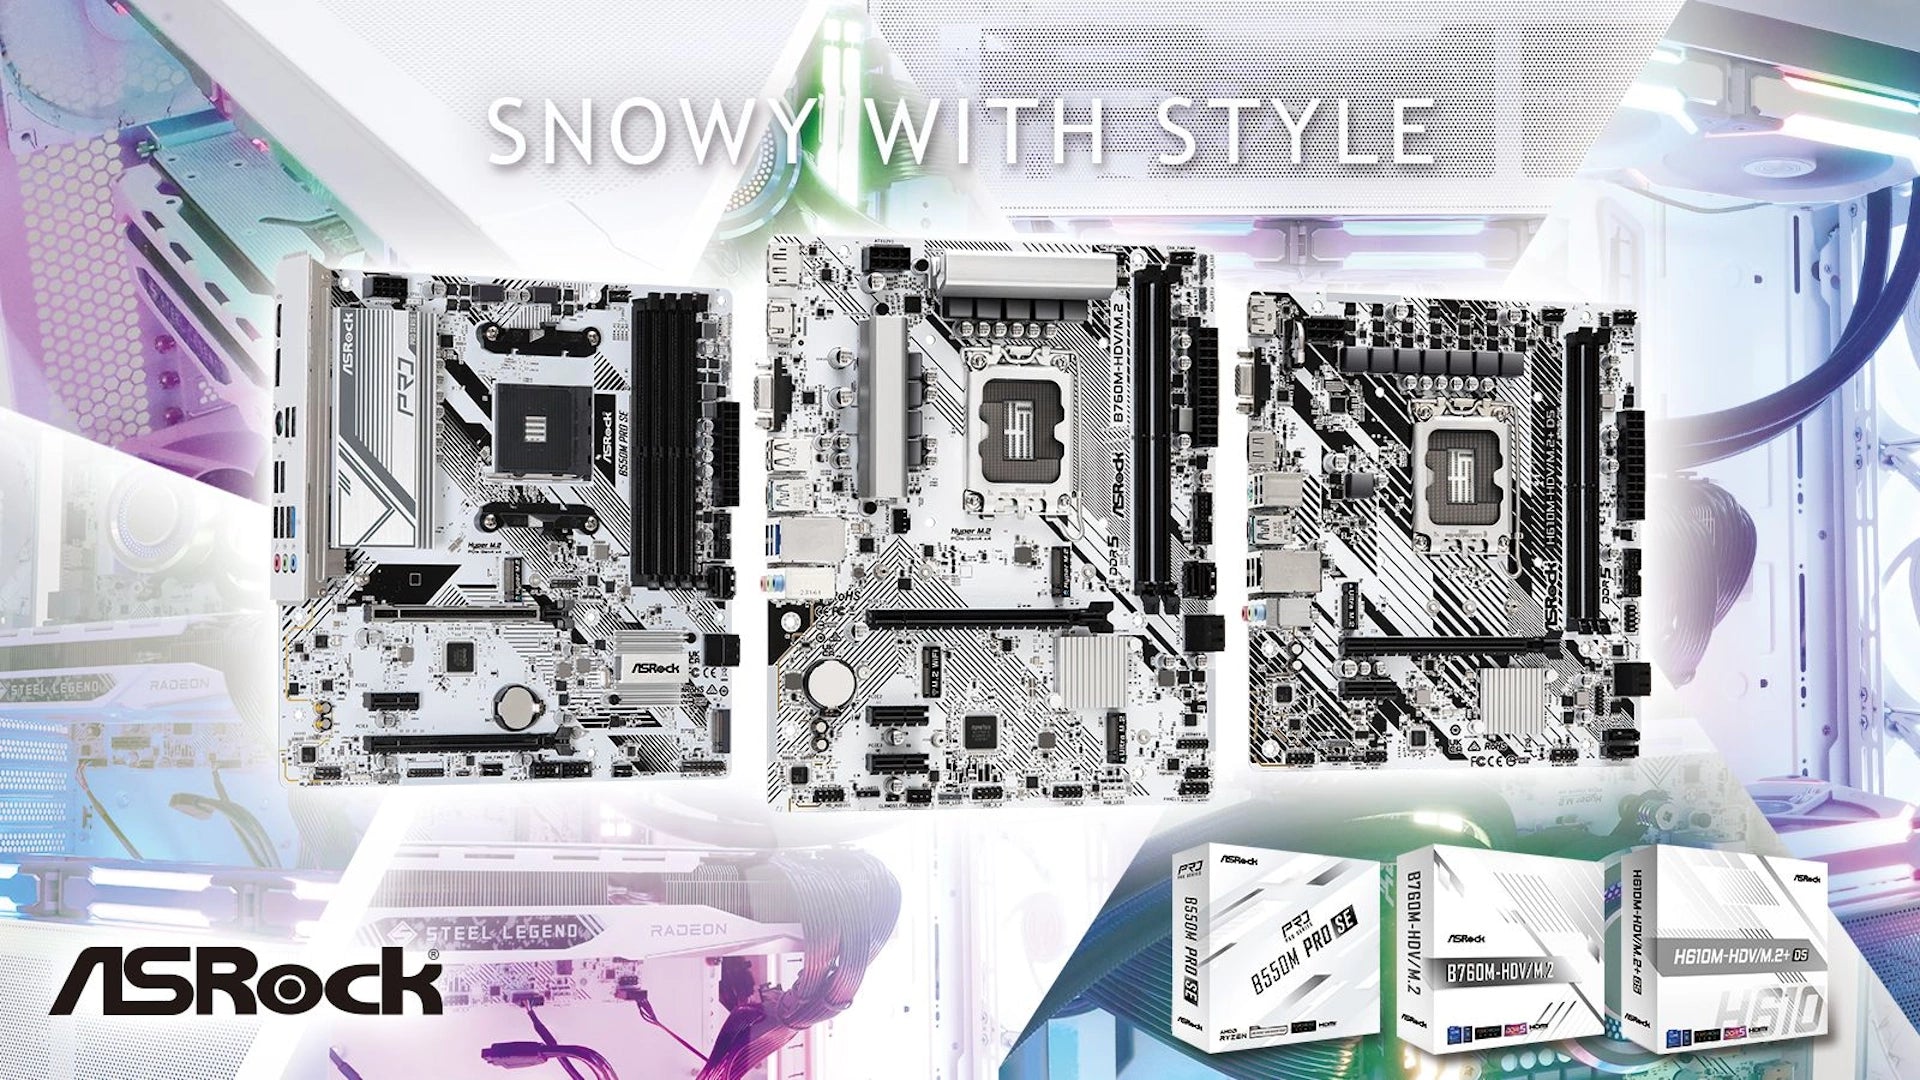 Snowy with Style! ASRock Launches All-White Motherboards